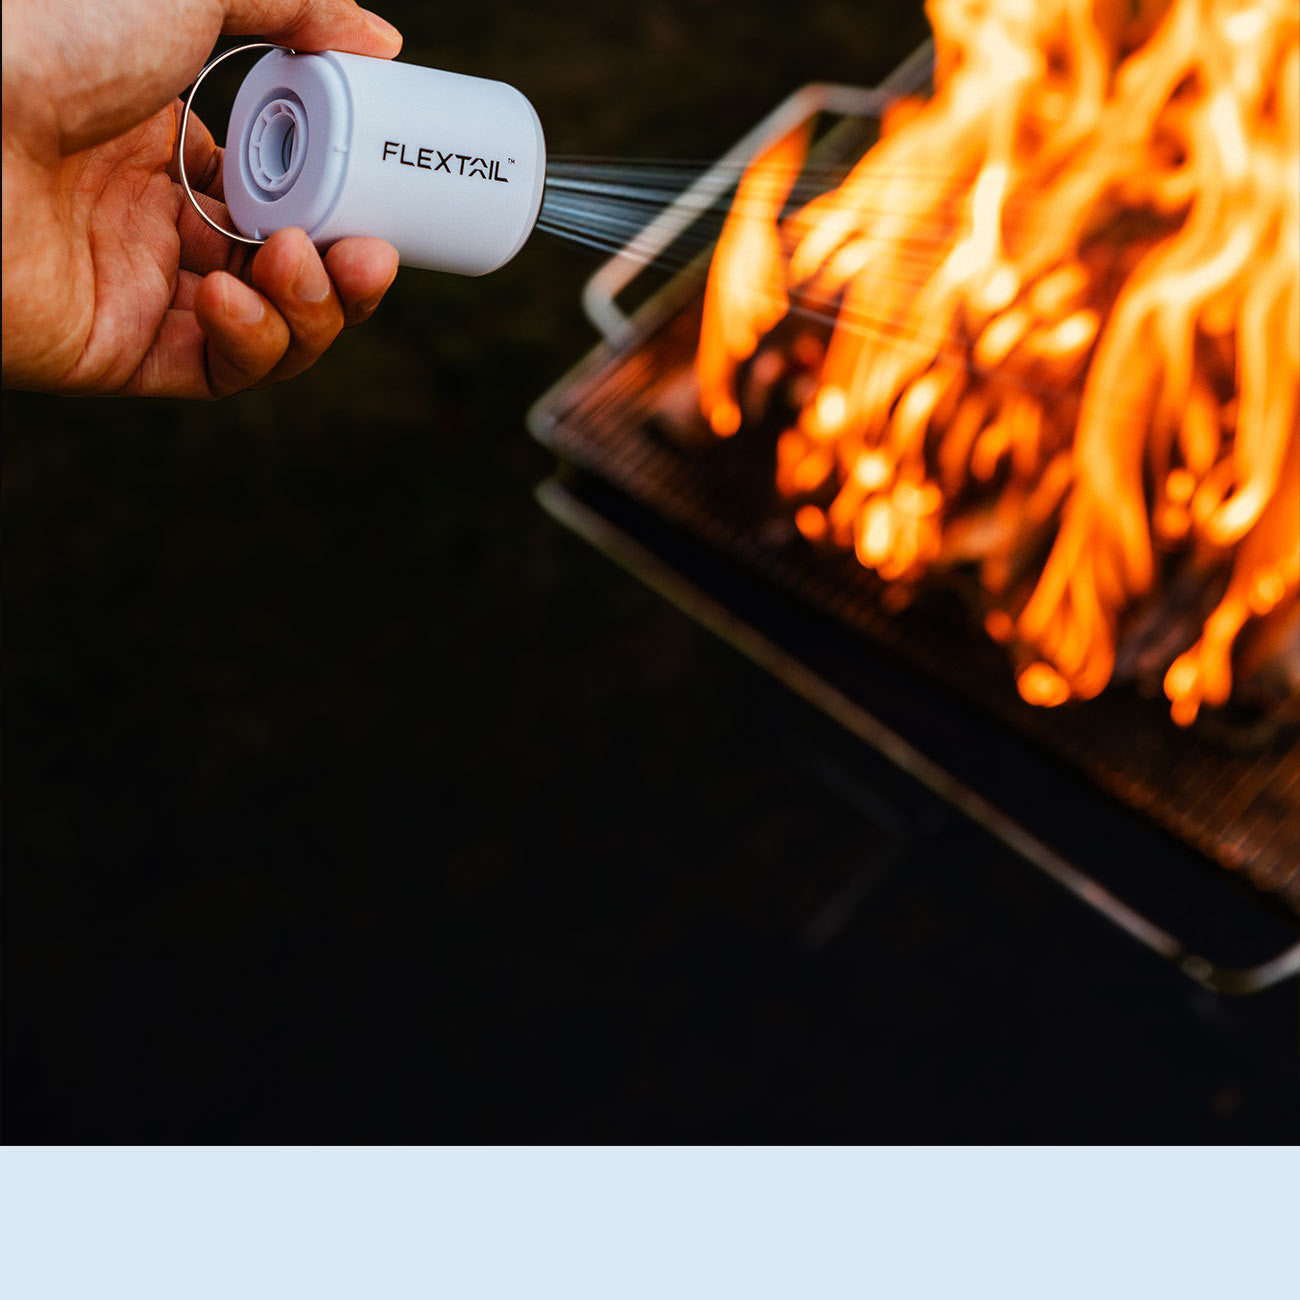 Outdoor Portable Mini Camping USB Inflator - My Store